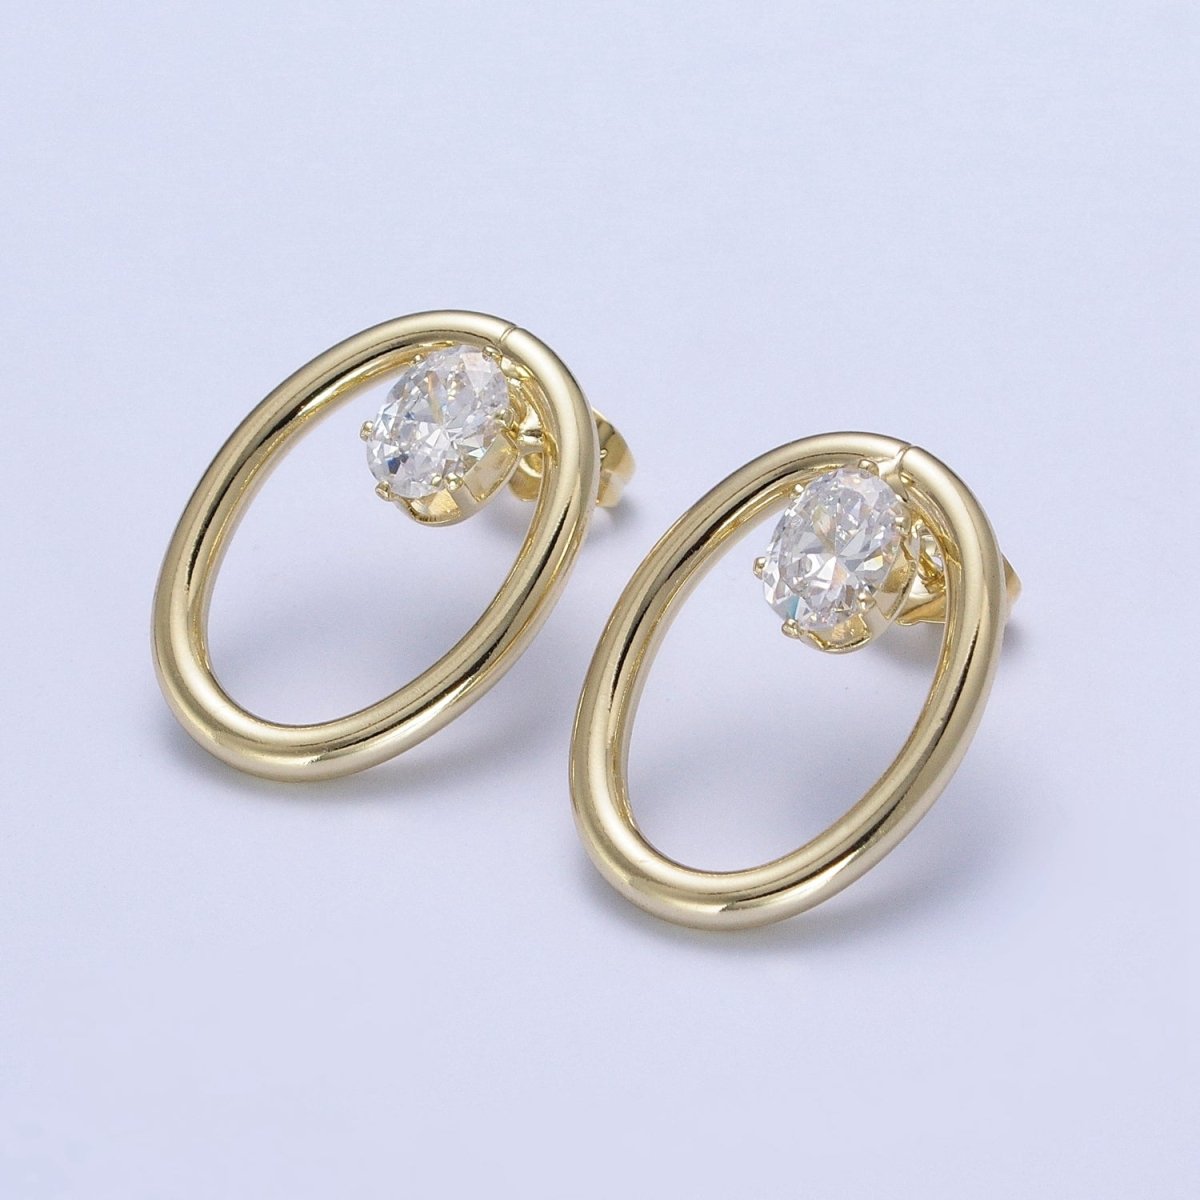 14K Gold Filled Minimalist Stud Earring Light Gold Round Circle with Dainty Cubic Zirconia Crystal, Perfect for Everyday Wear or Gift | X914 - DLUXCA